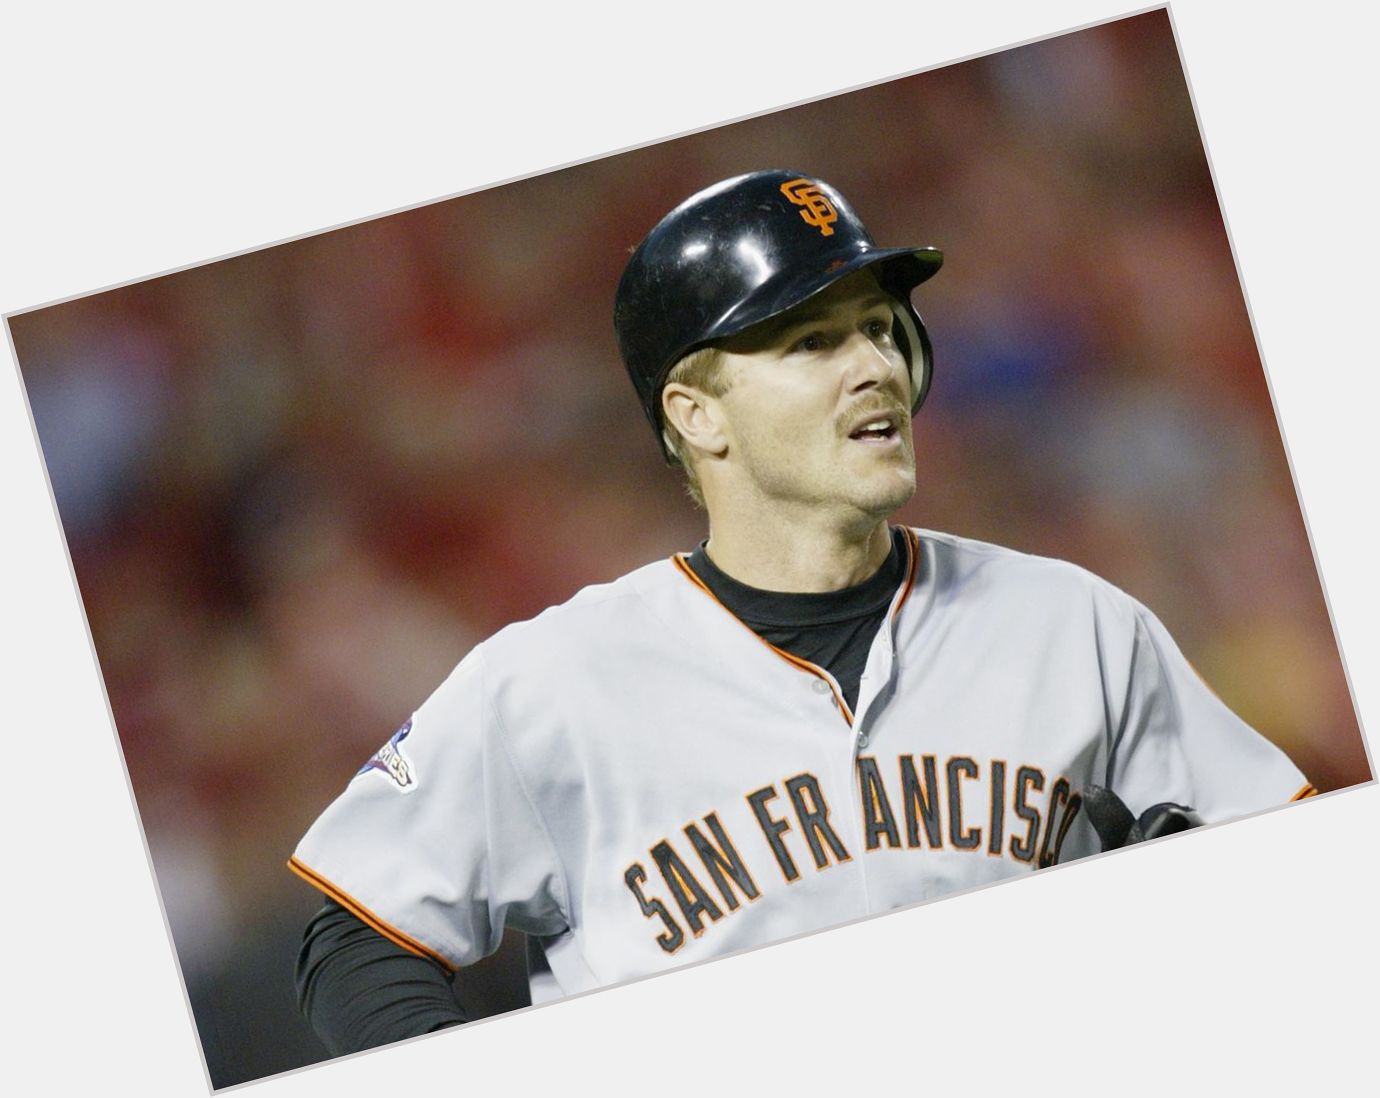 Happy birthday to Jeff Kent, who made Barry Bonds look cute and cuddly by comparison  